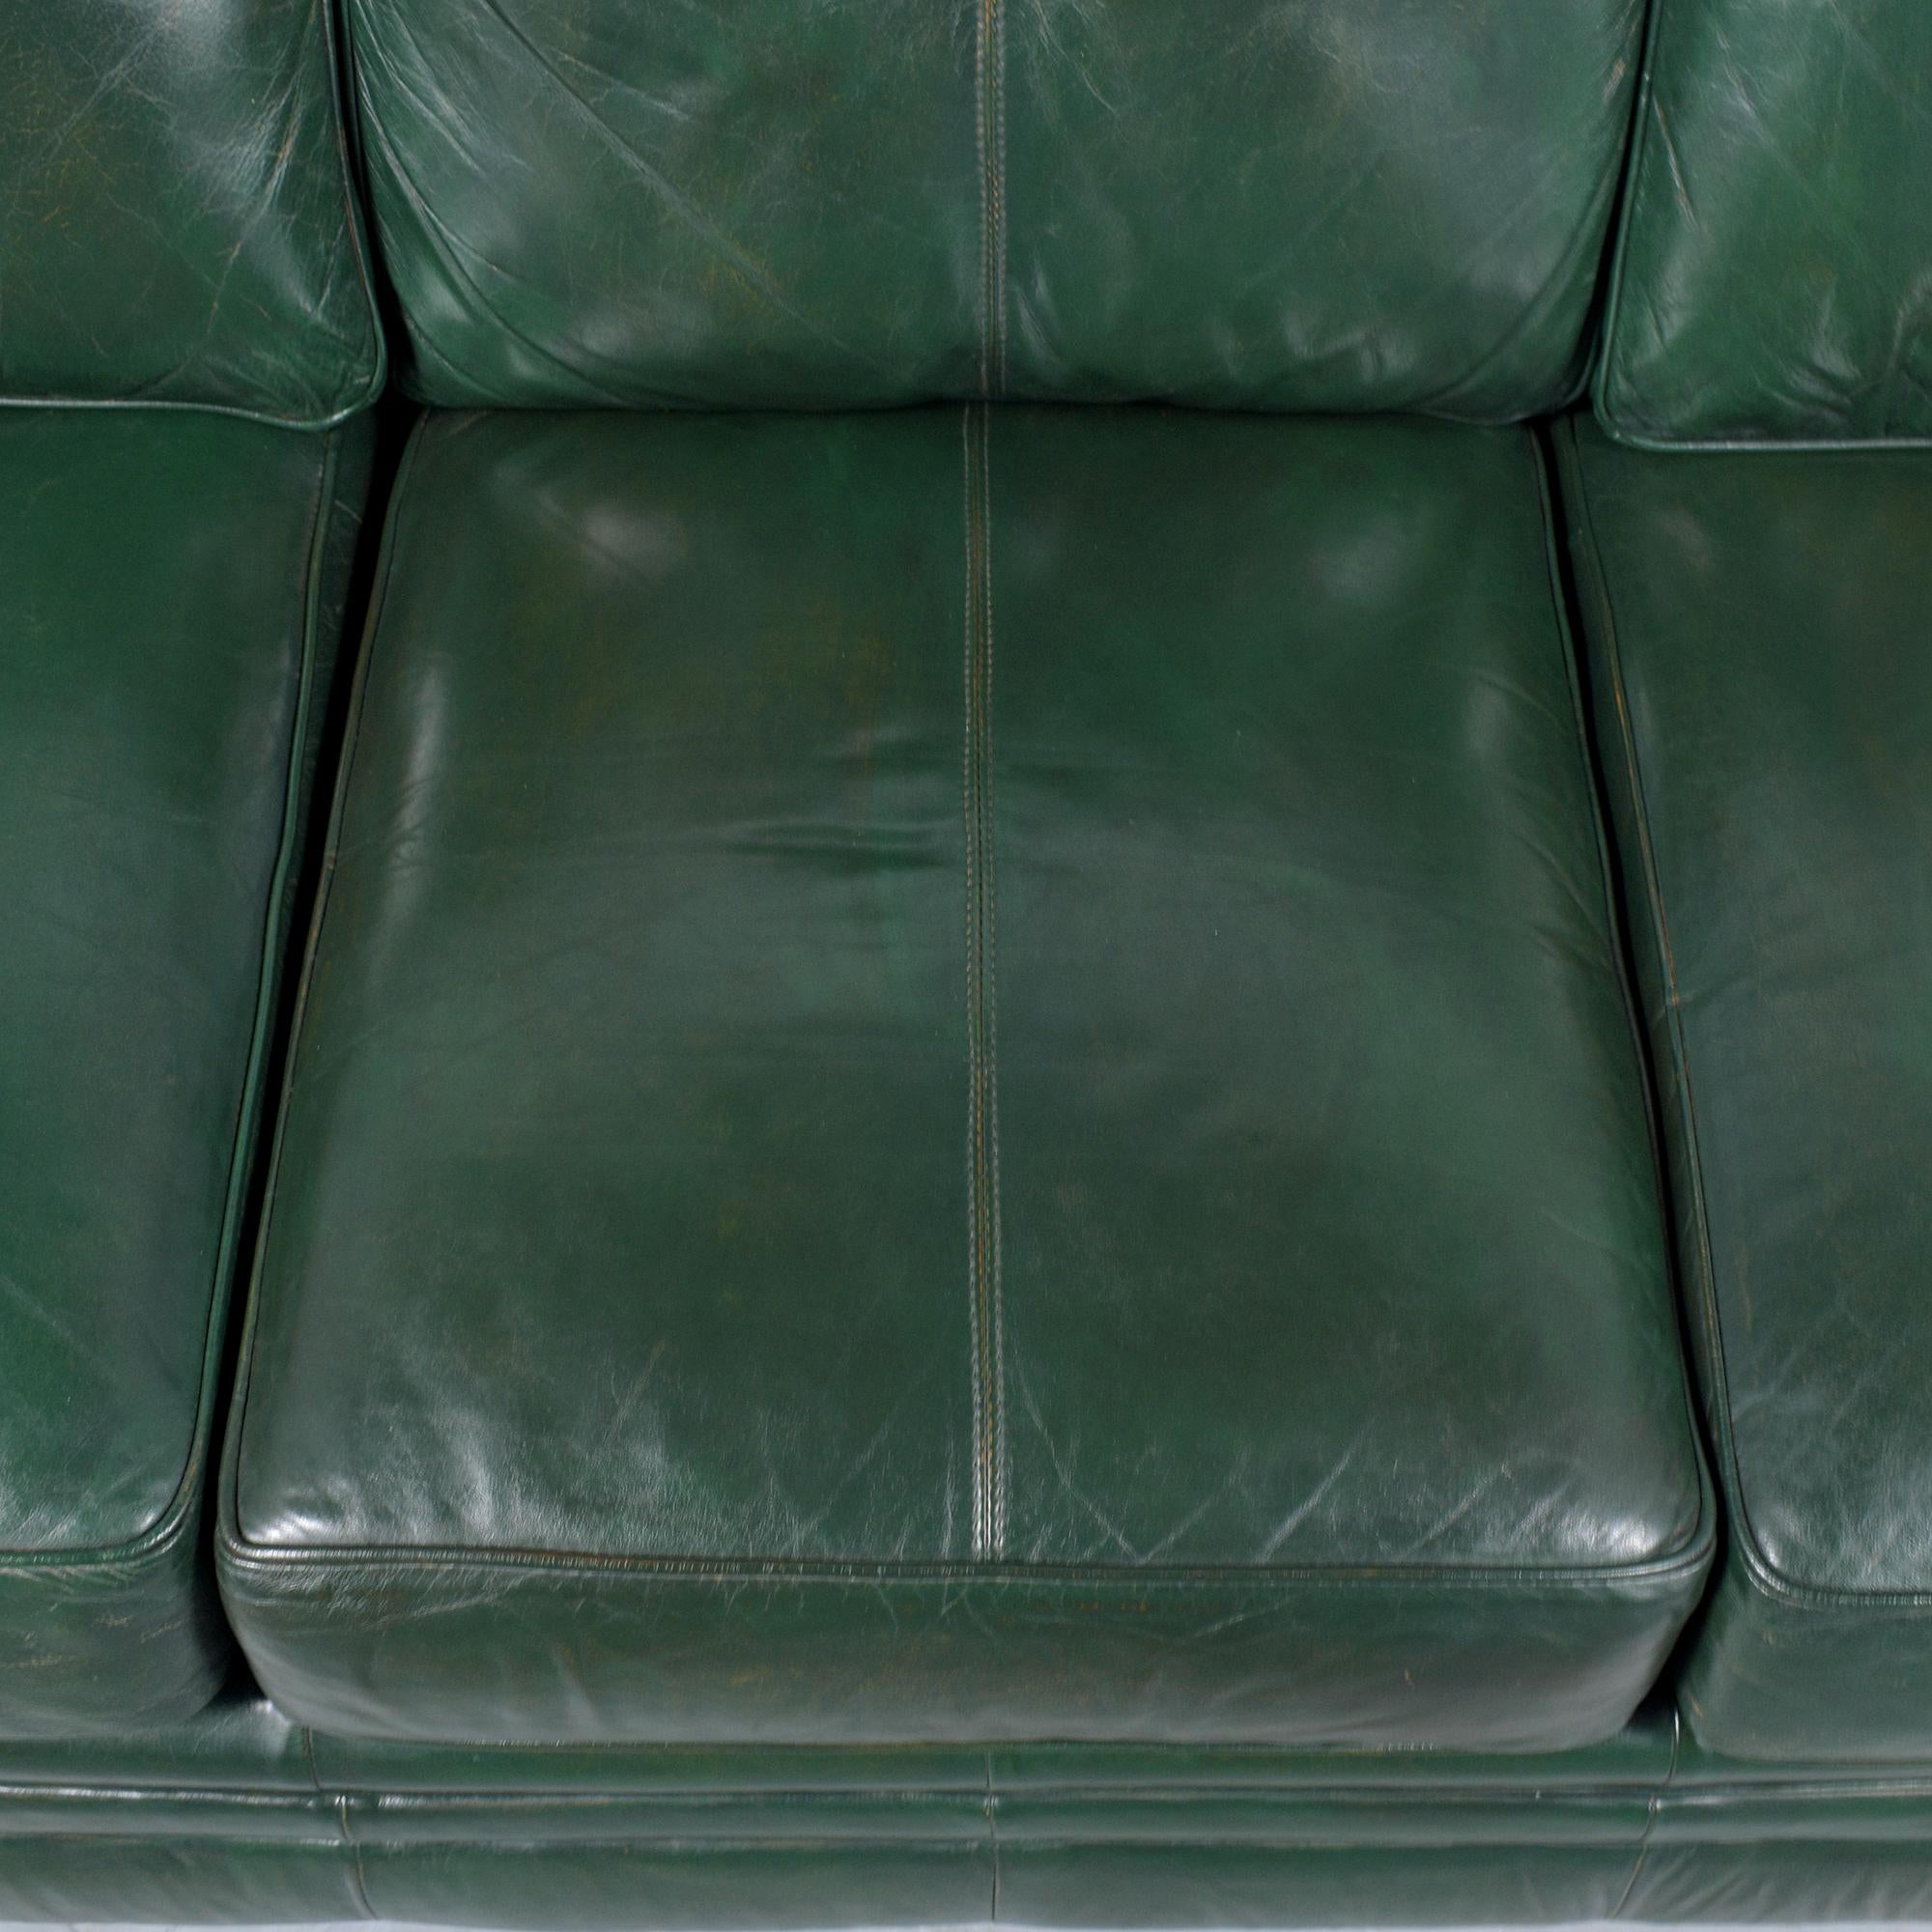 Mid-Century Modern Elegant 1980s Restored Leather Sofa: A Blend of Vintage and Modern For Sale